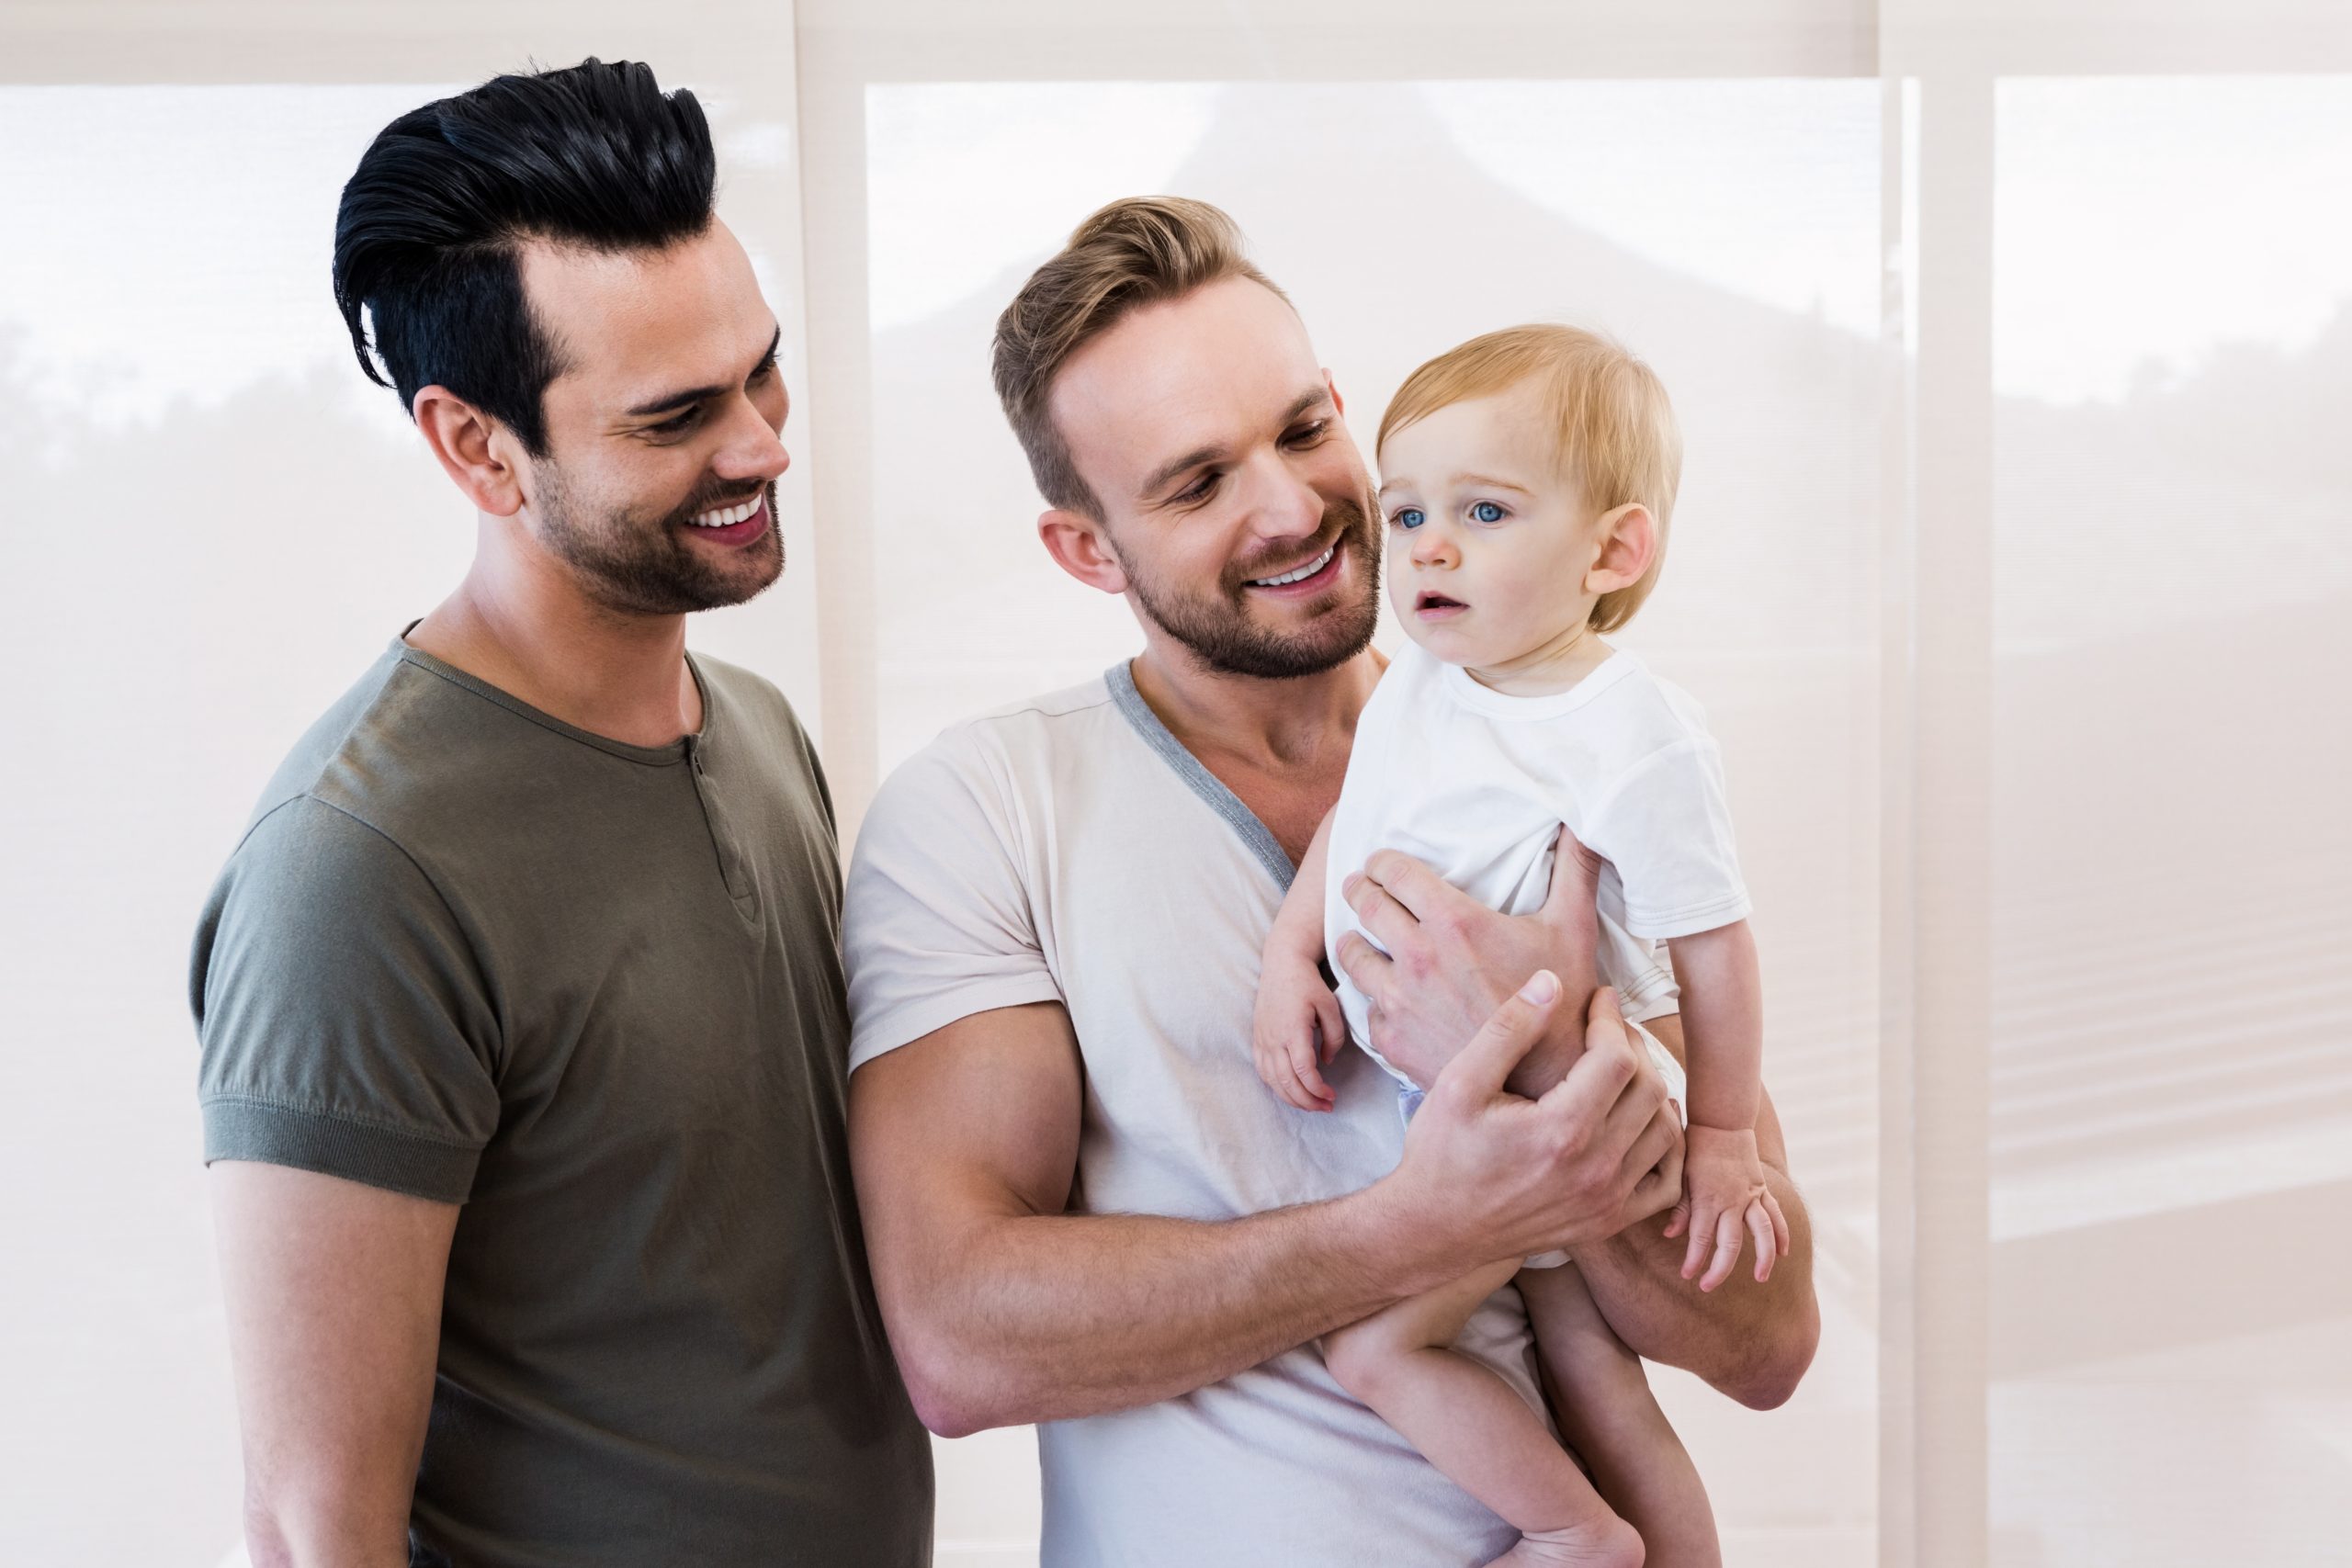 Couple standing side by side with one man holding baby. Both men smiling at baby